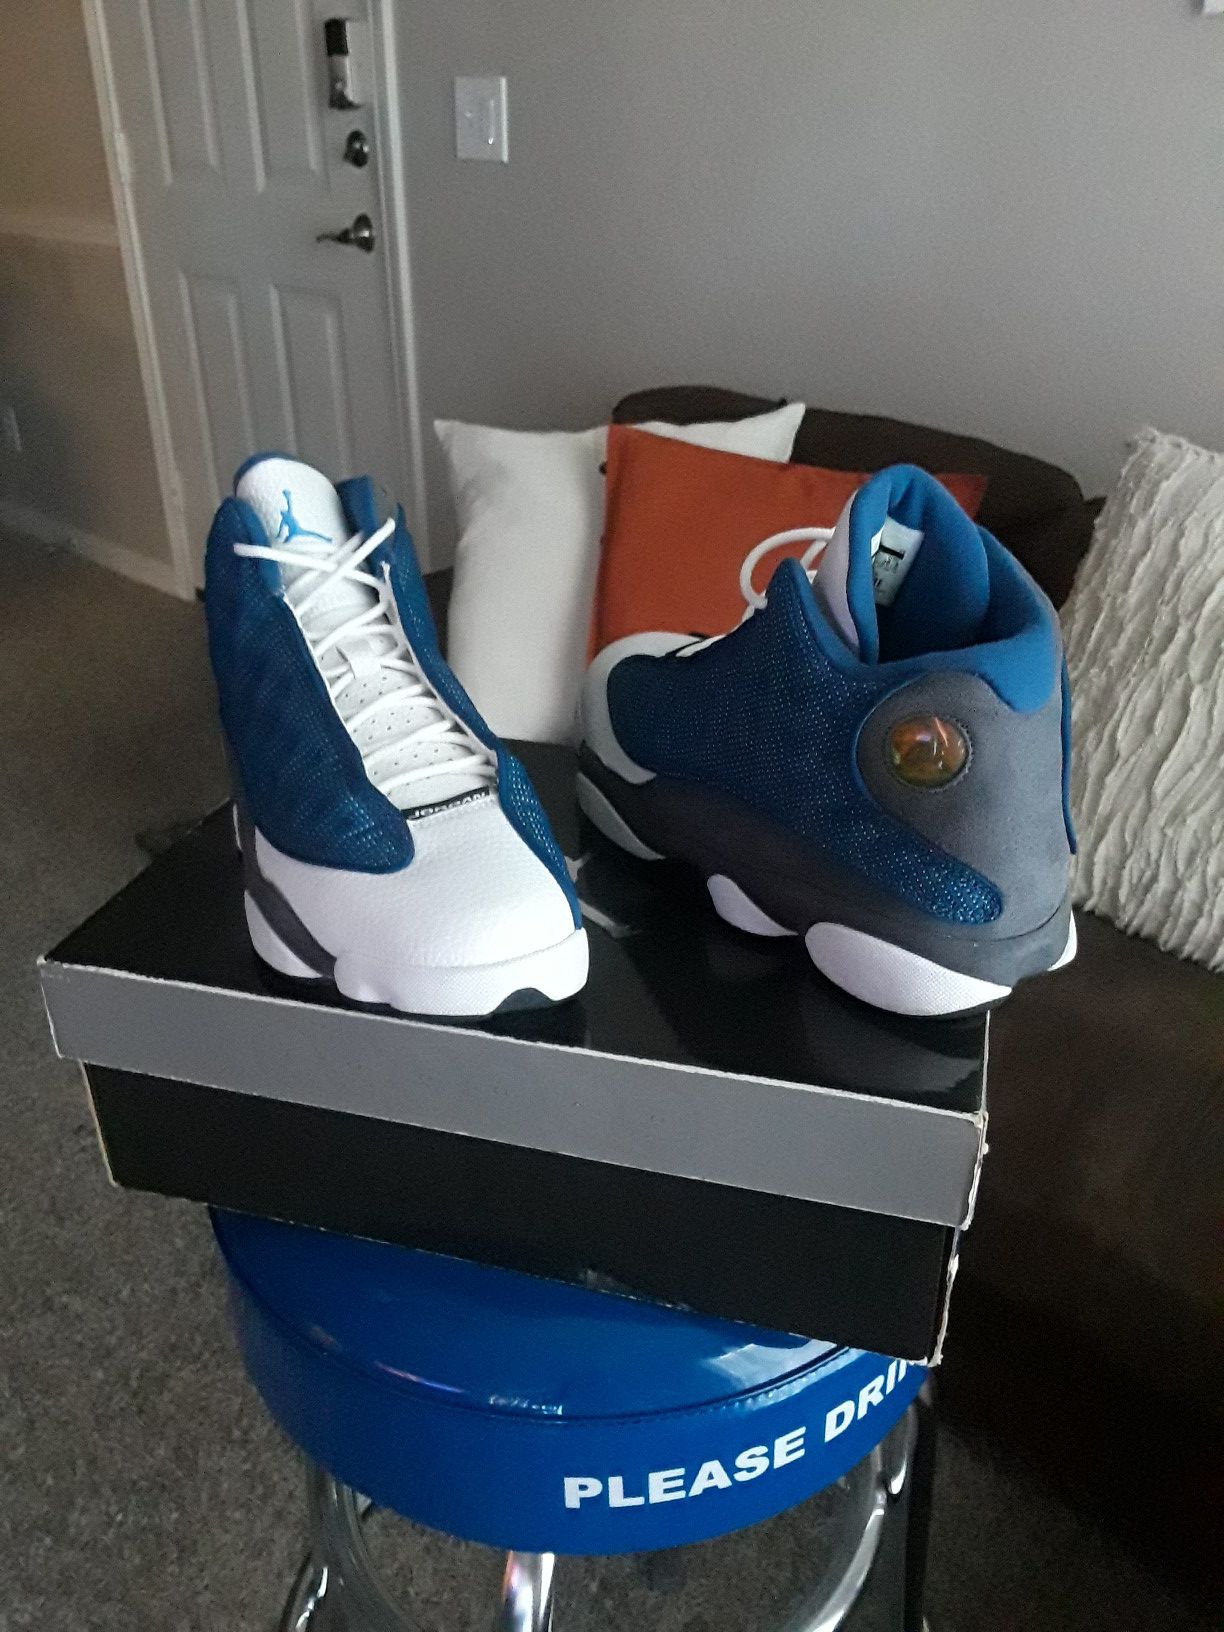 2010 Air Jordan 13s flint size 8.5 with original box used one time in real good condition 9.5/10 $300 pick up in east Dallas